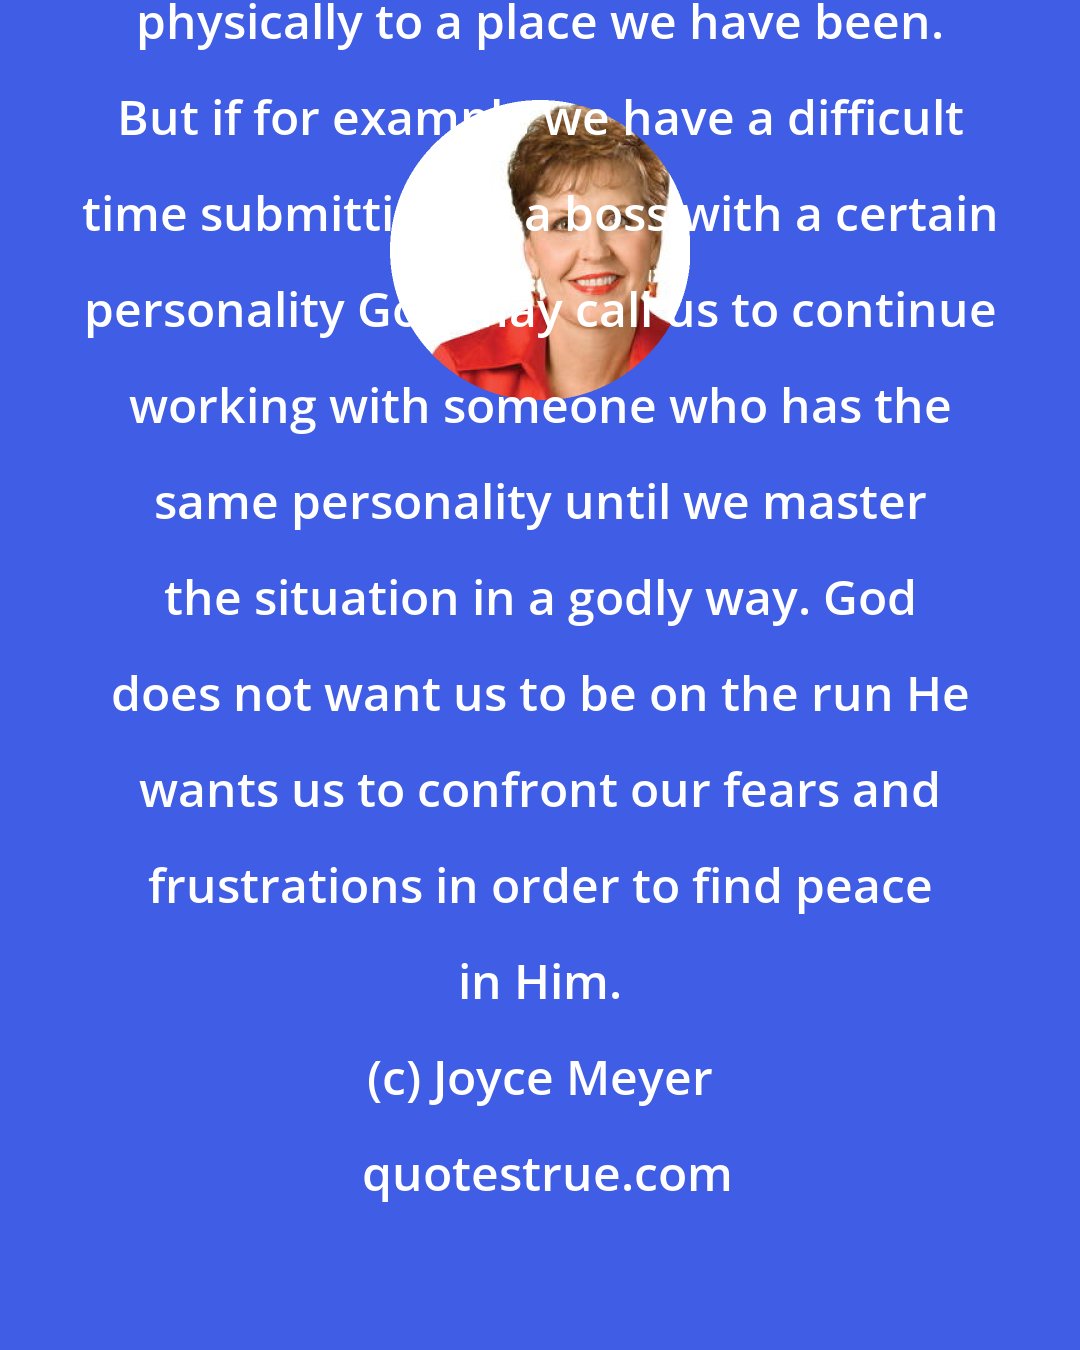 Joyce Meyer: God does not always call us to go back physically to a place we have been. But if for example we have a difficult time submitting to a boss with a certain personality God may call us to continue working with someone who has the same personality until we master the situation in a godly way. God does not want us to be on the run He wants us to confront our fears and frustrations in order to find peace in Him.